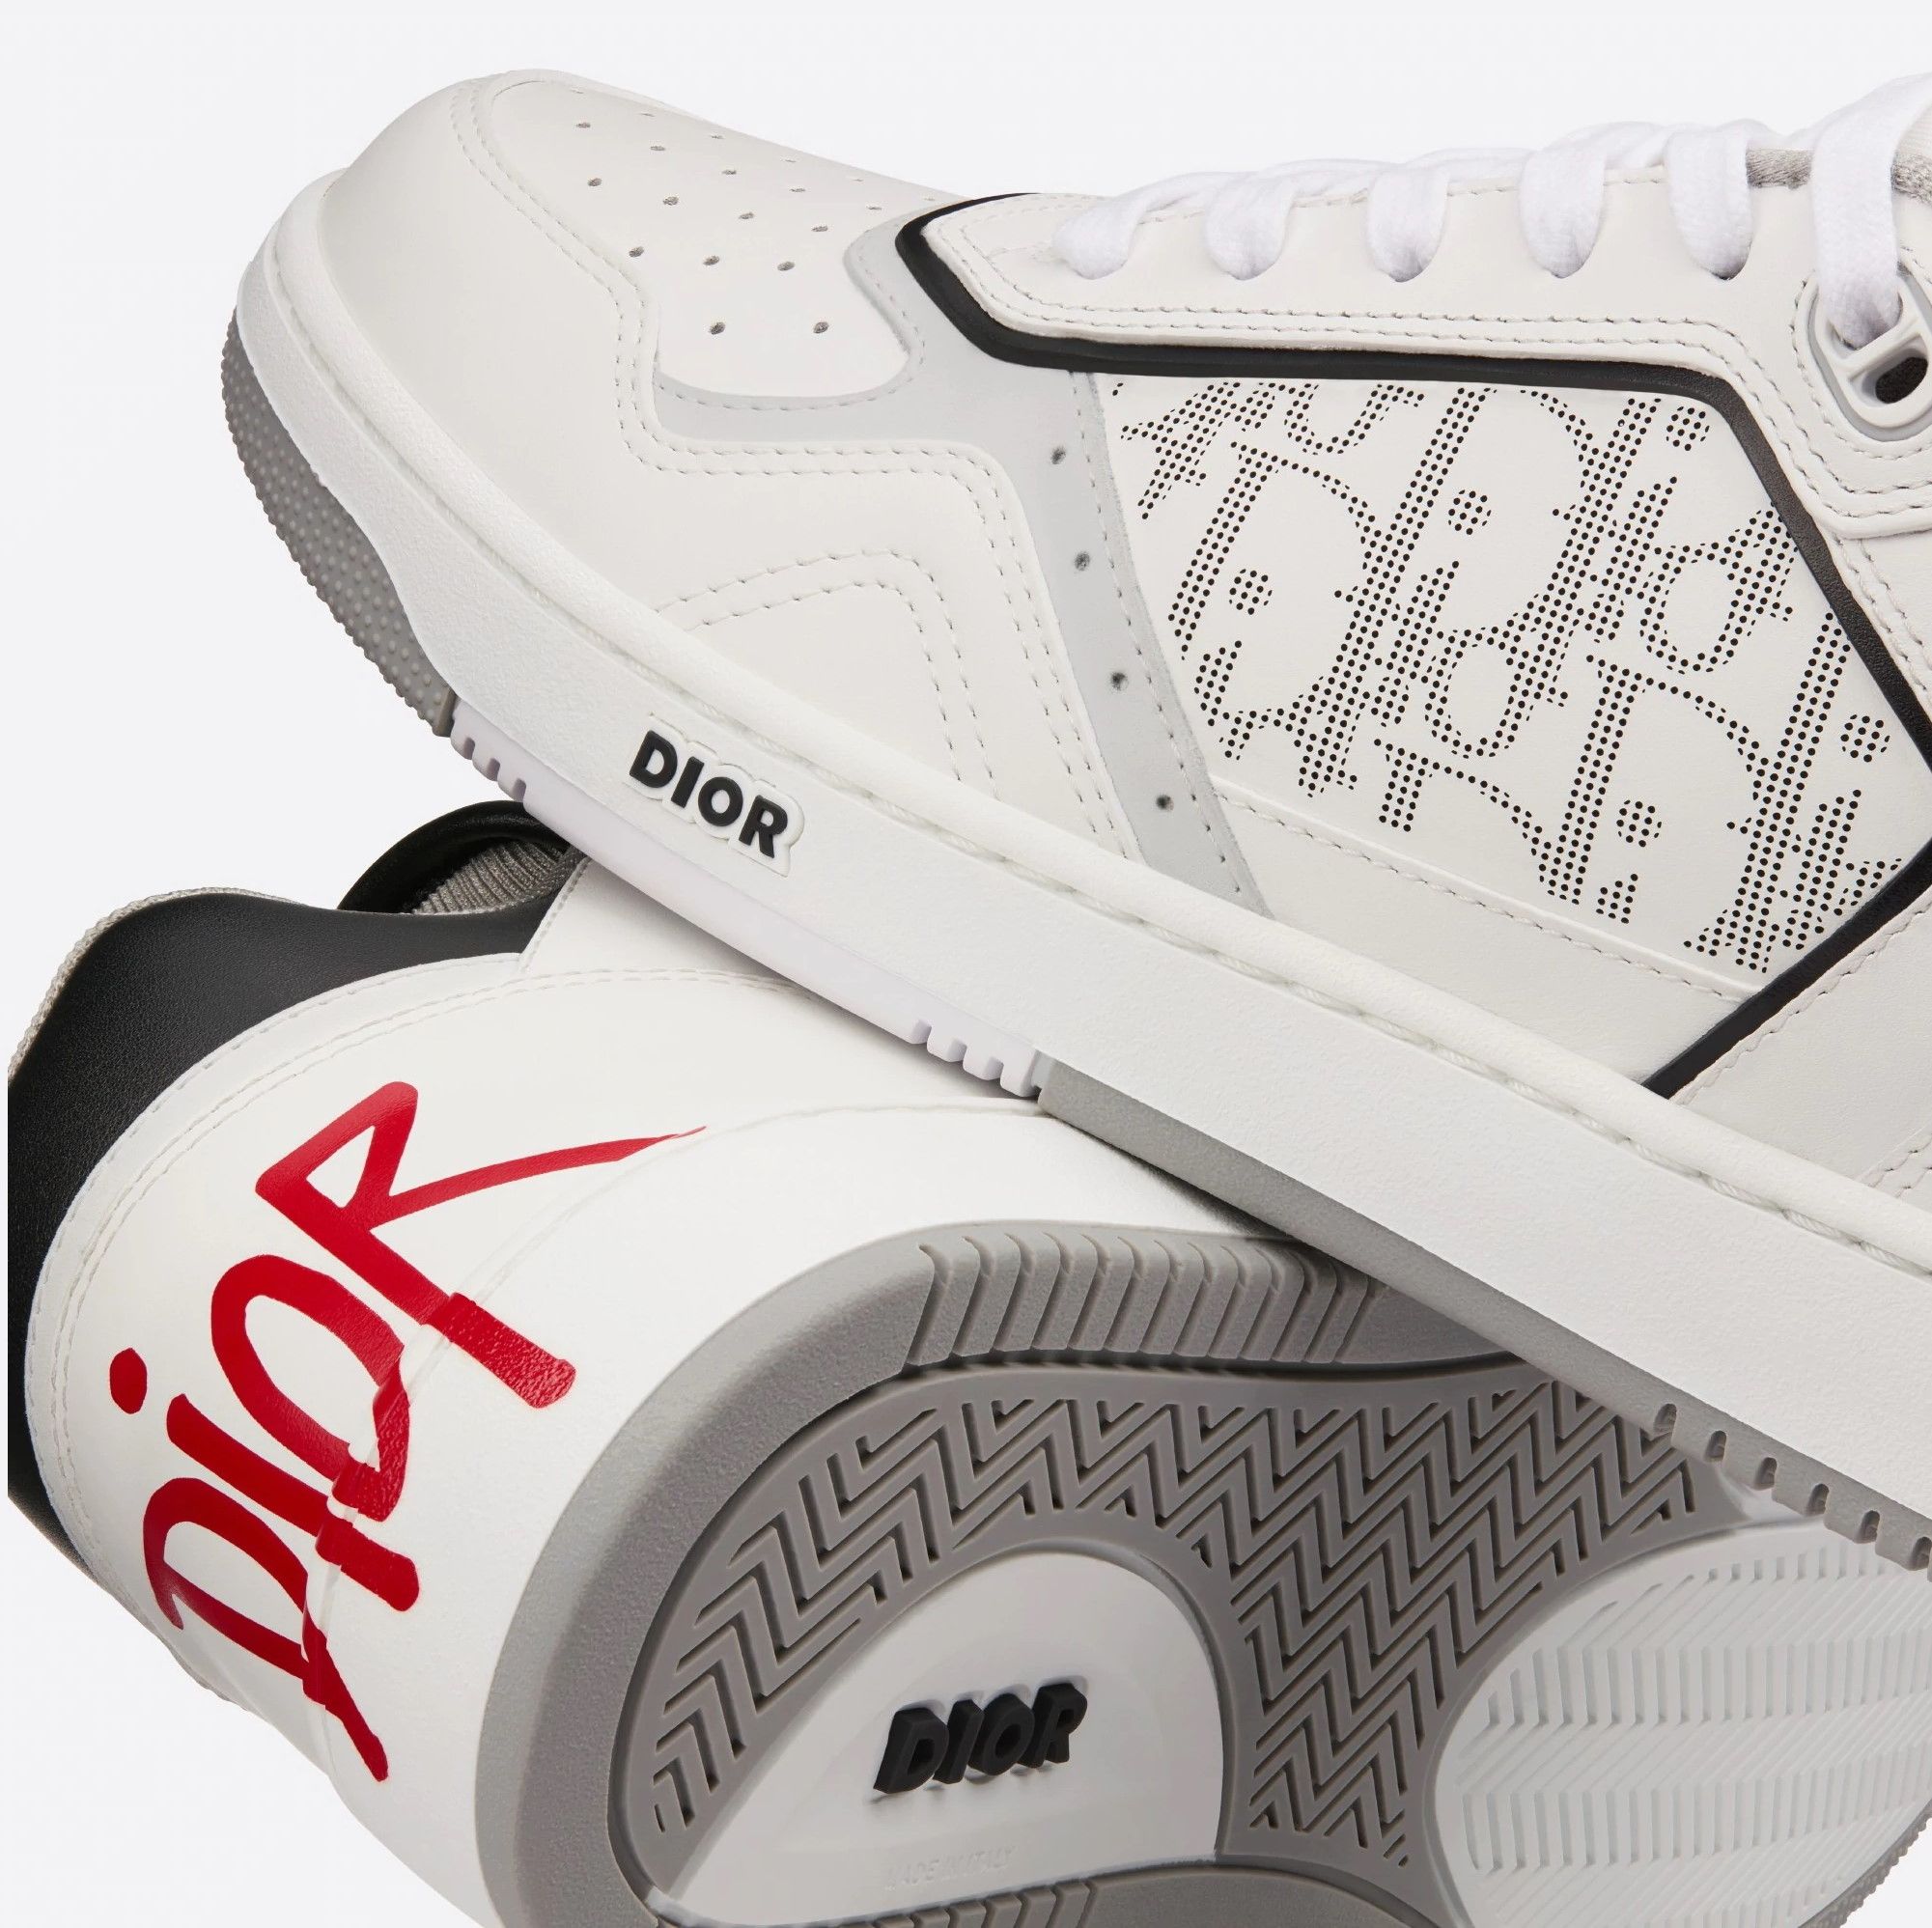 The Shawn Stussy Dior B27 from Dior and Shawn Stussy is now on sale